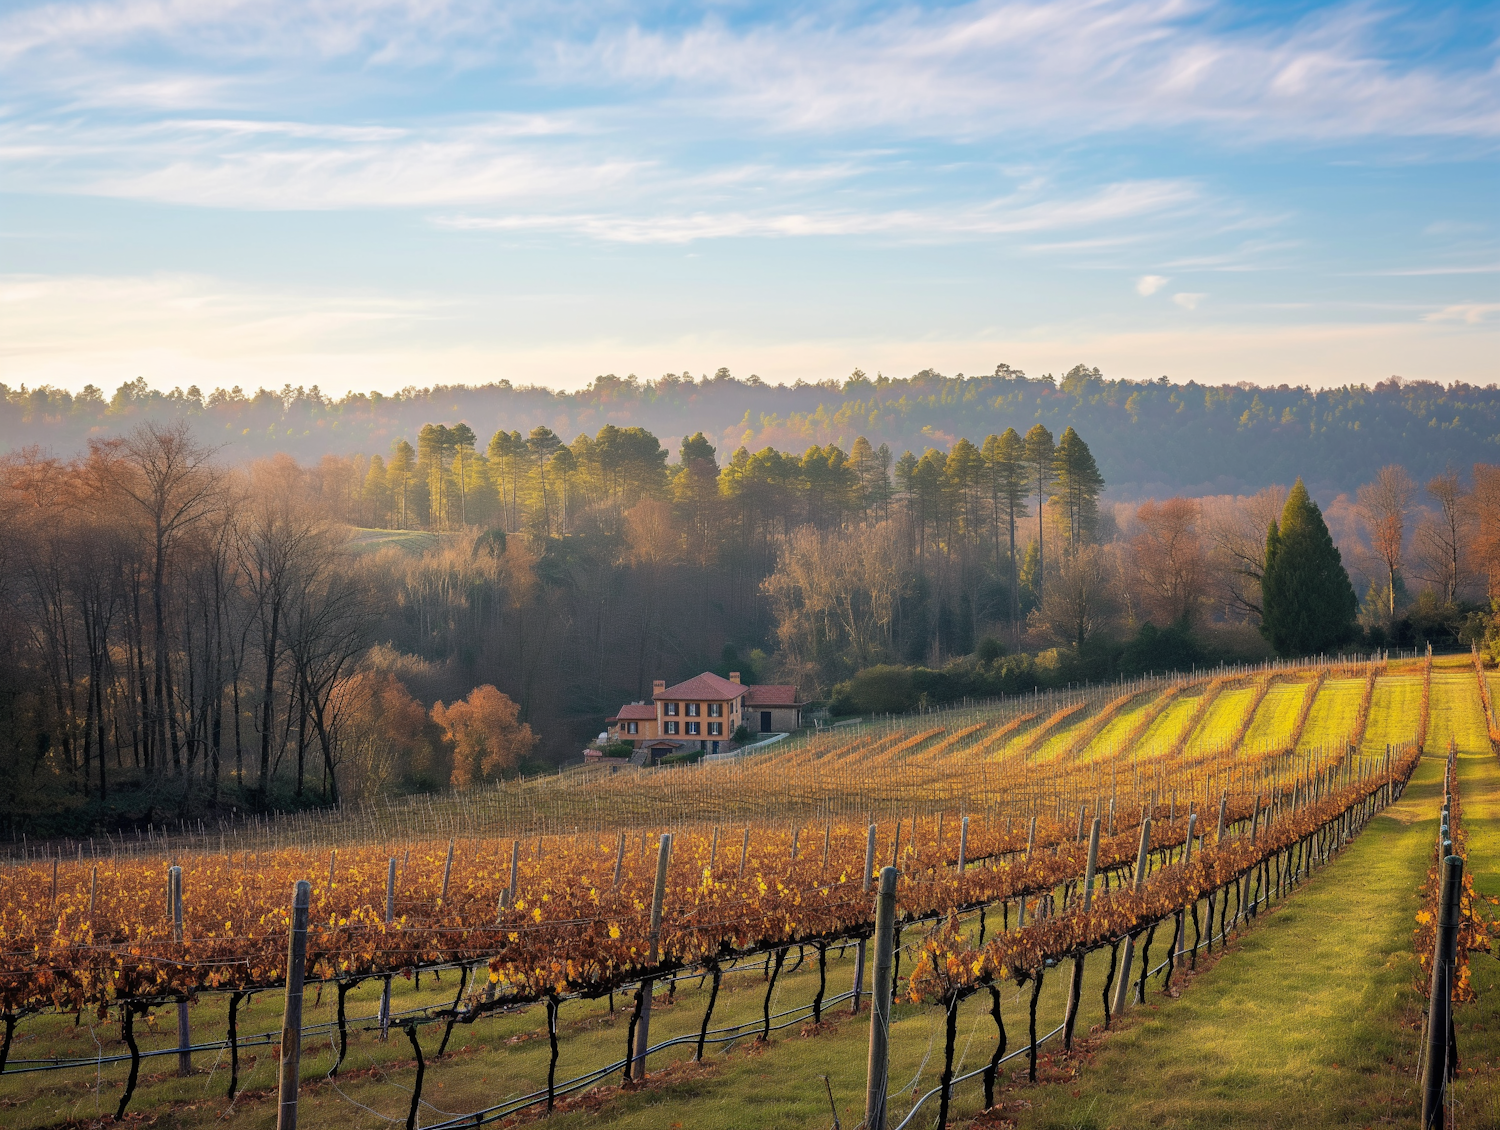 Autumn Afternoon at the Vineyard